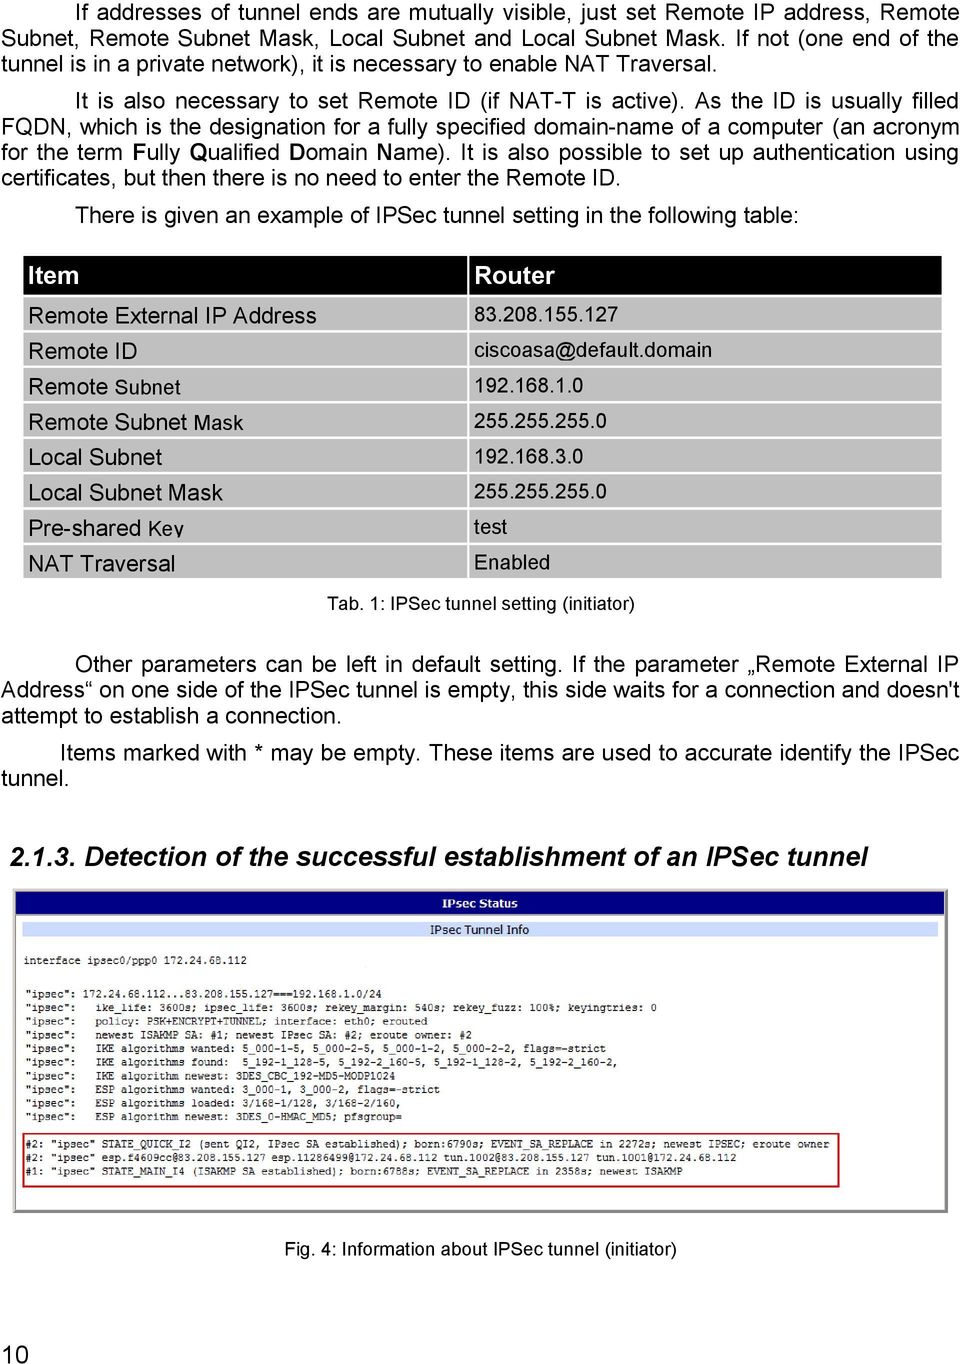 As the ID is usually filled FQDN, which is the designation for a fully specified domain-name of a computer (an acronym for the term Fully Qualified Domain Name).